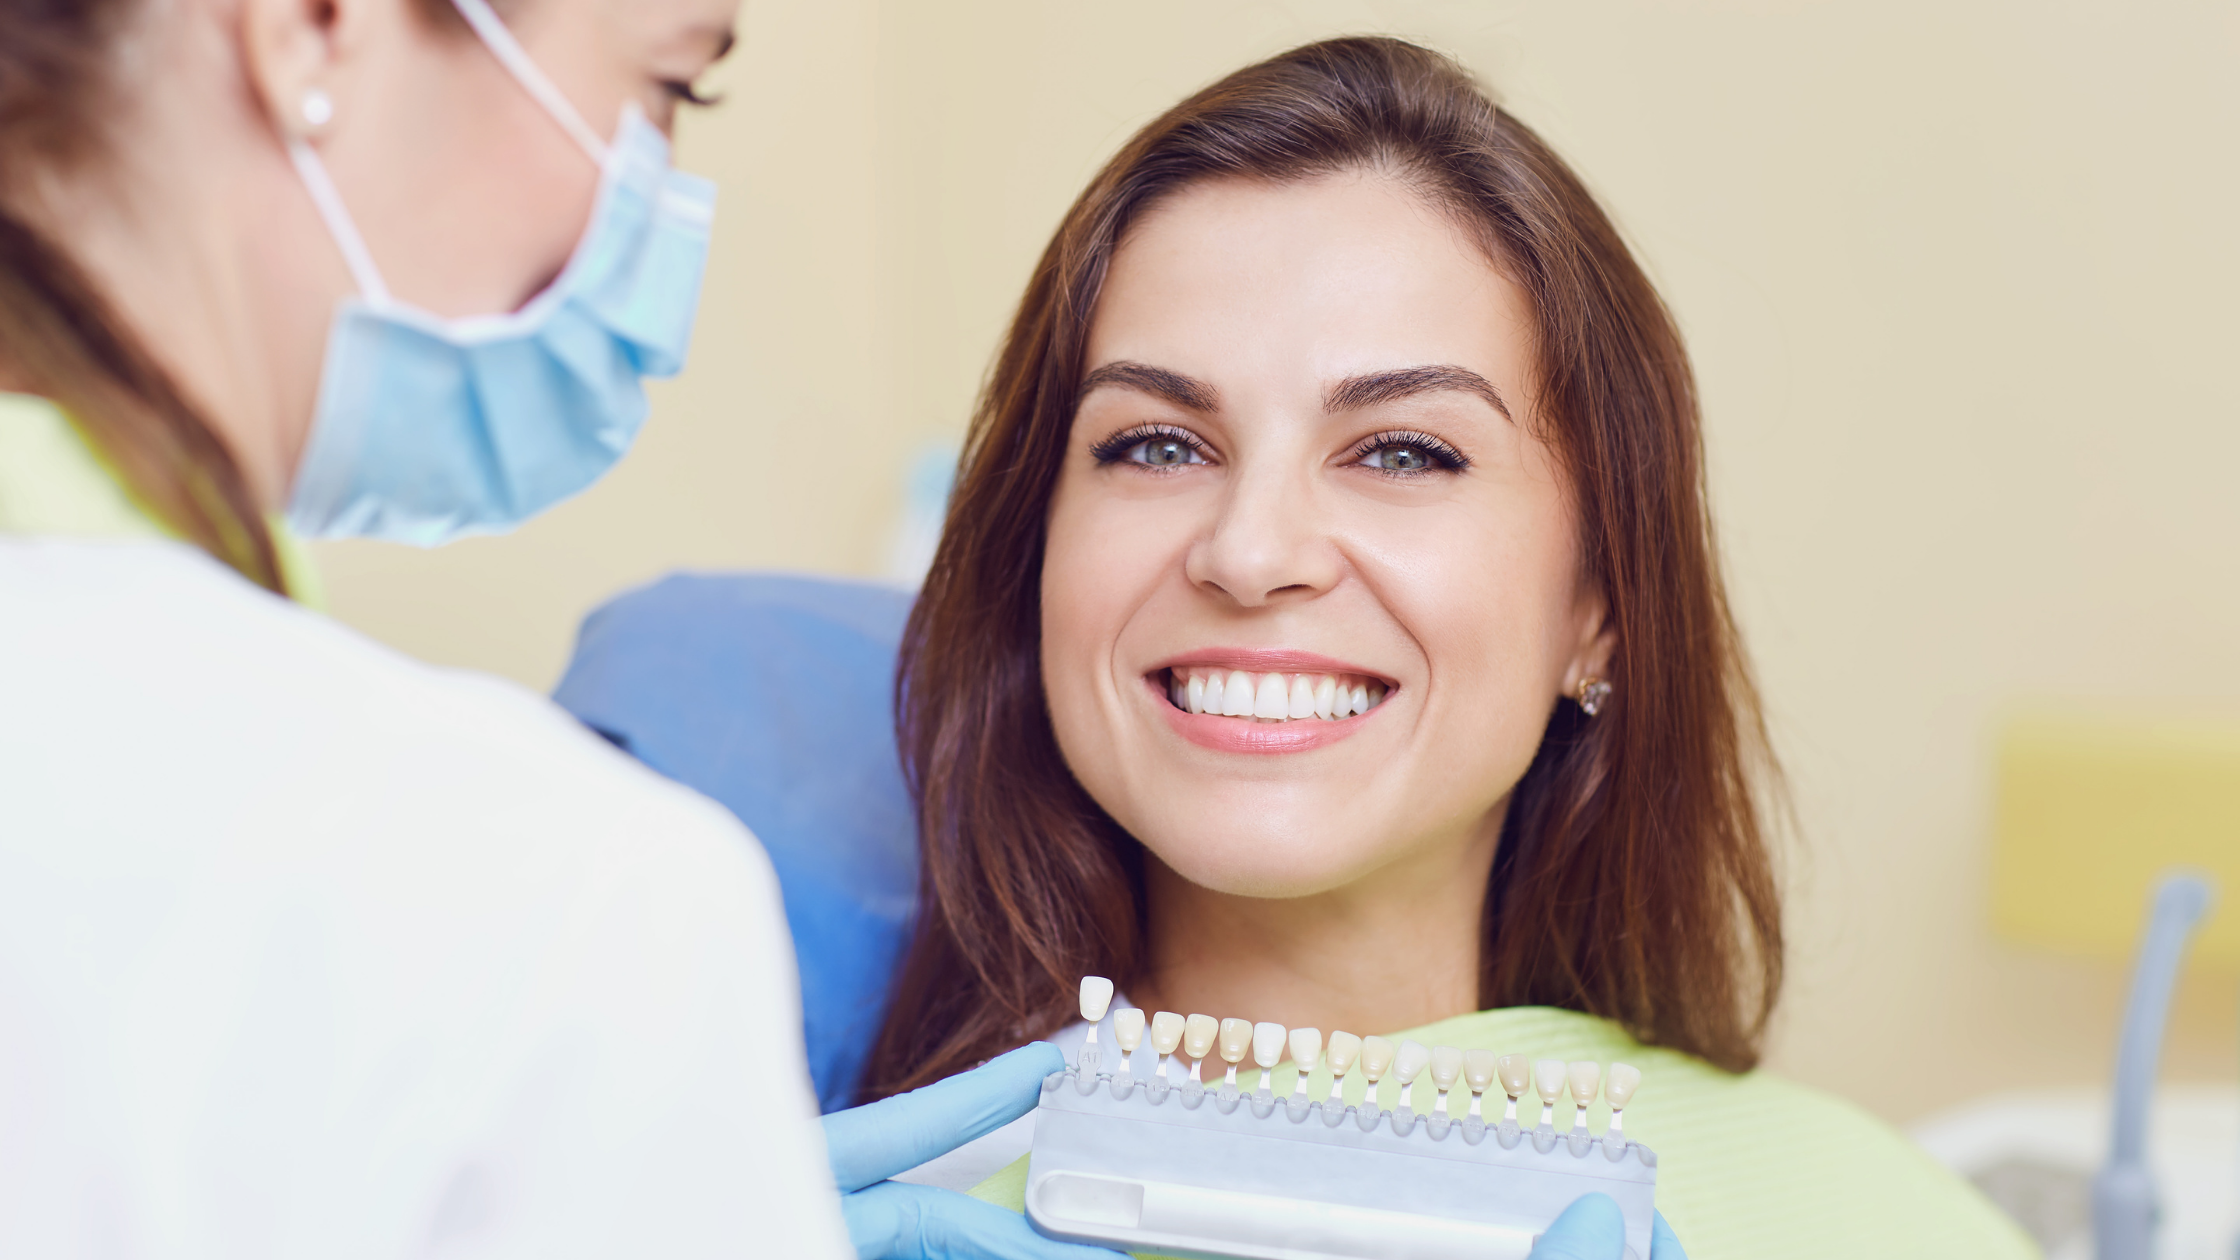 Get the Best Home Teeth Whitening Kits in Mullica Hill, NJ at this Practice